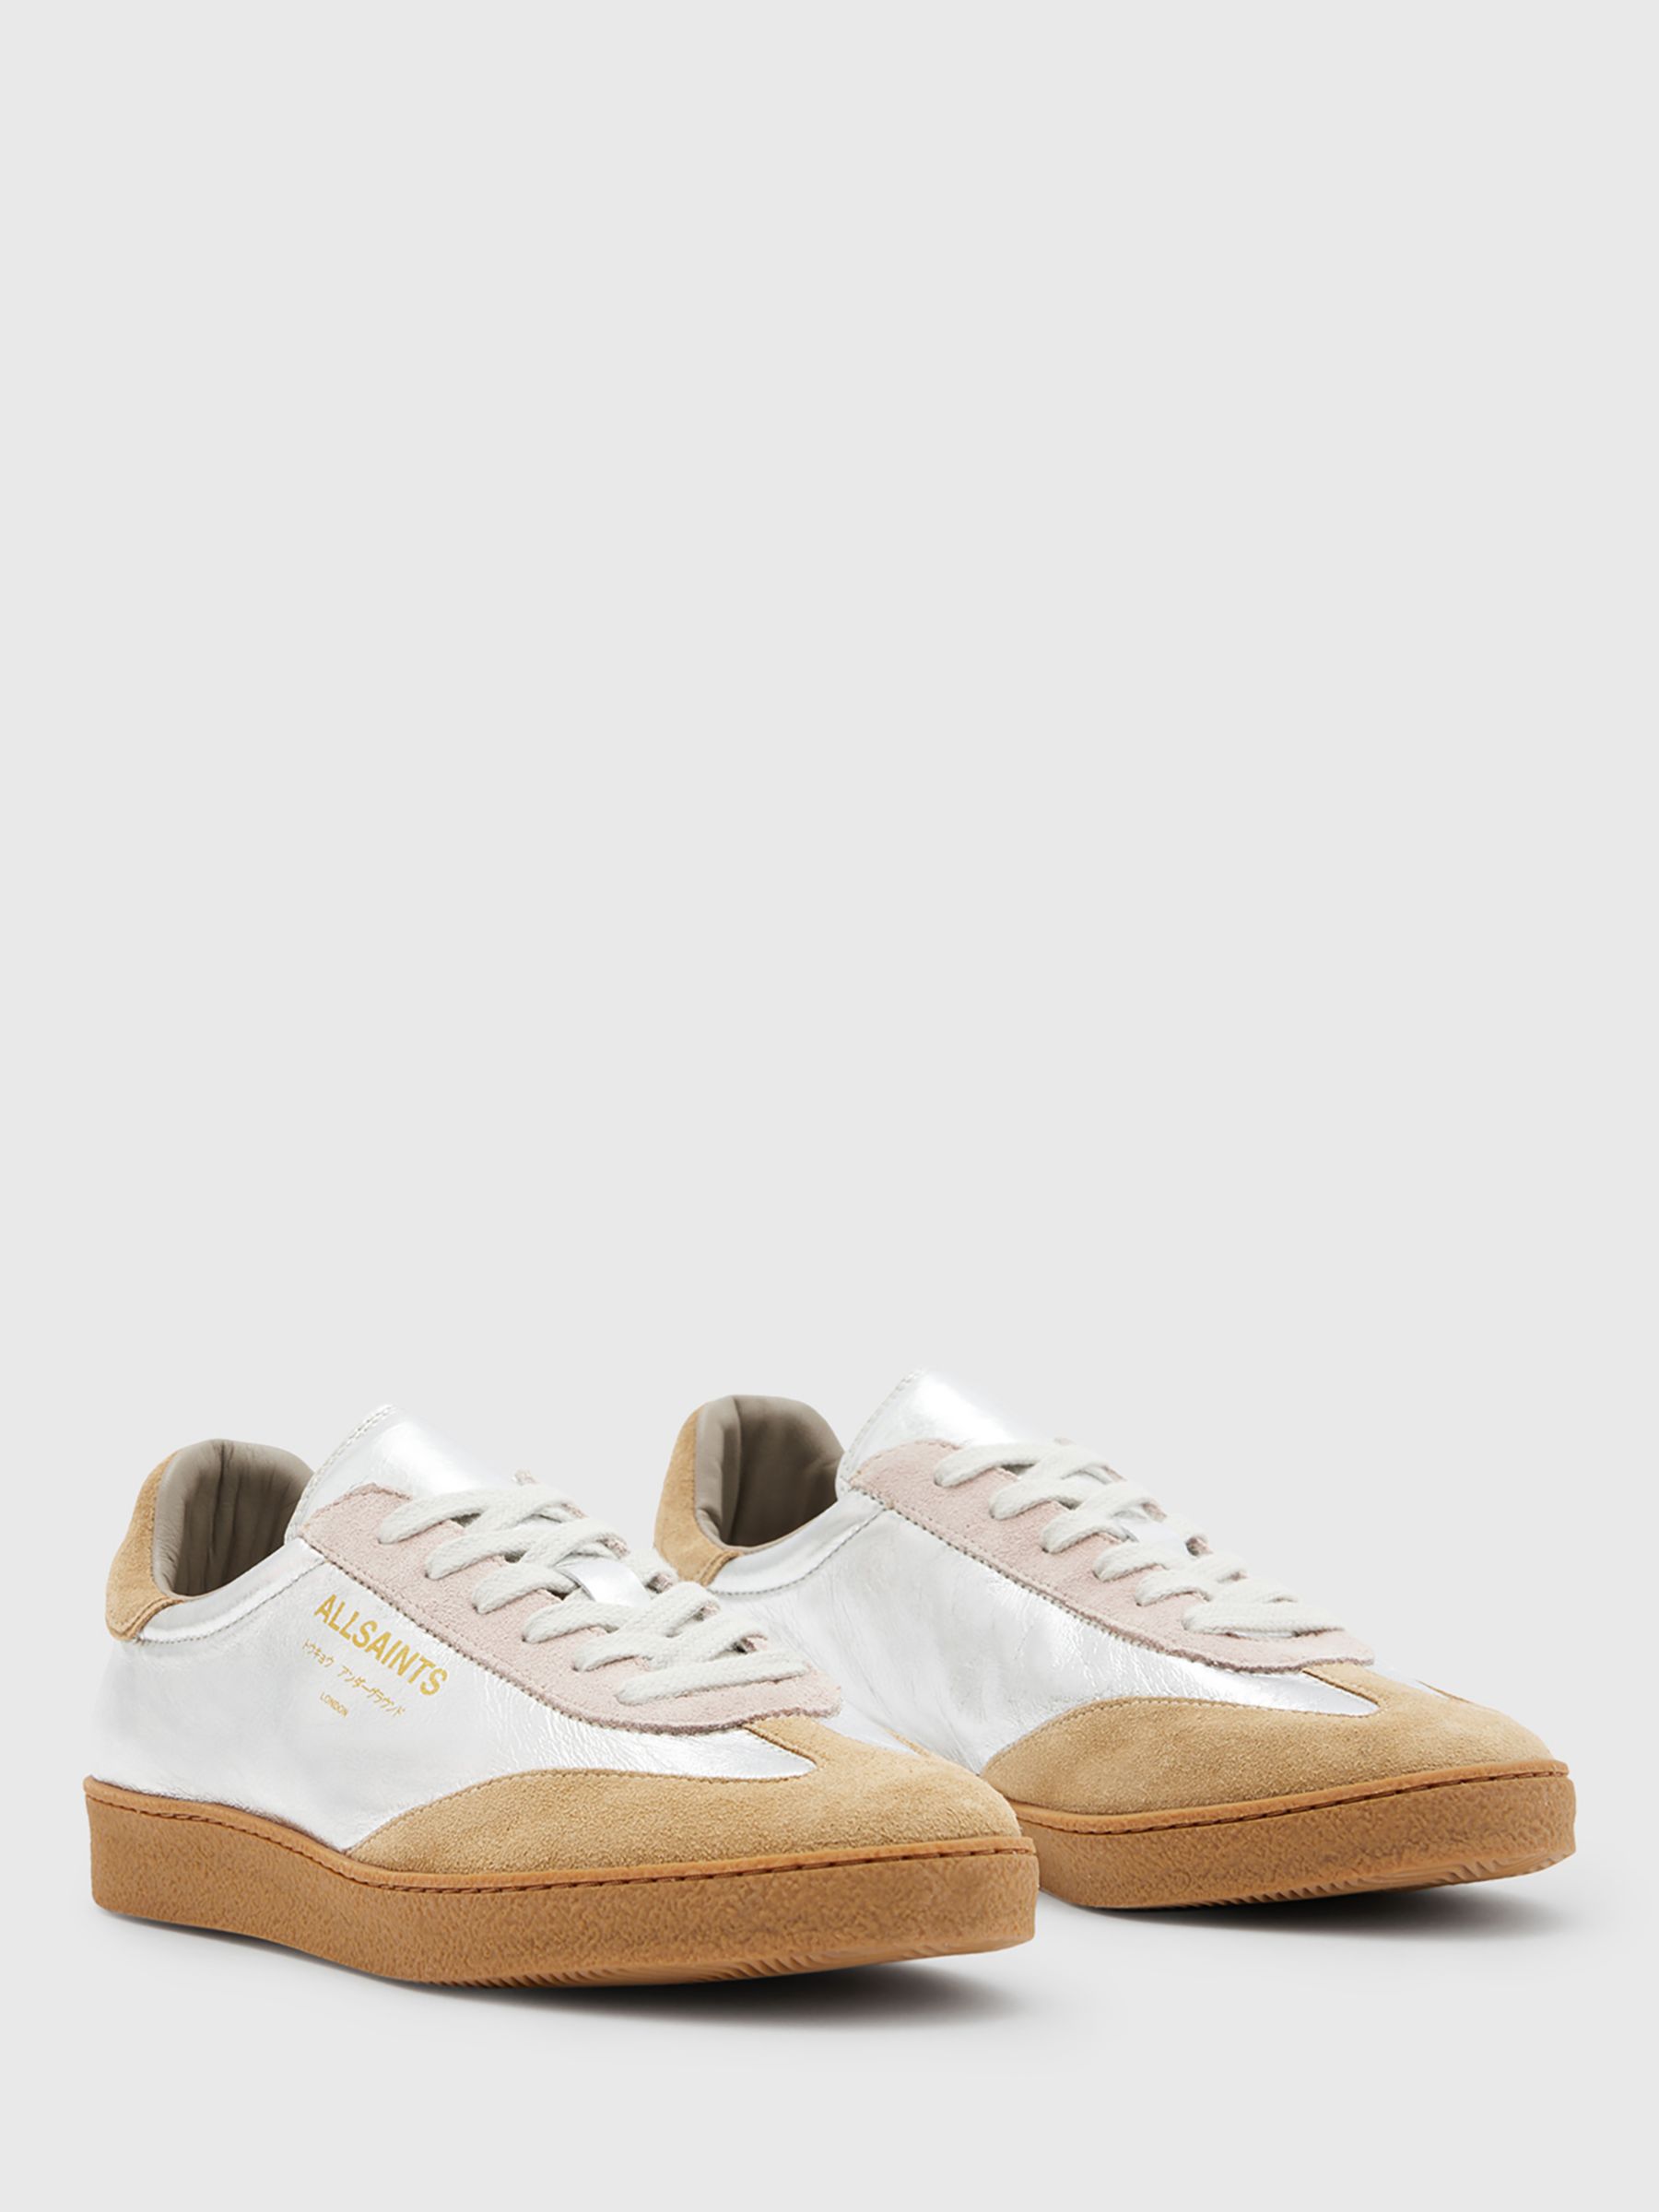 Buy AllSaints Thelma Metallic Leather Trainers, Silver/Rose Pink/Tan Online at johnlewis.com